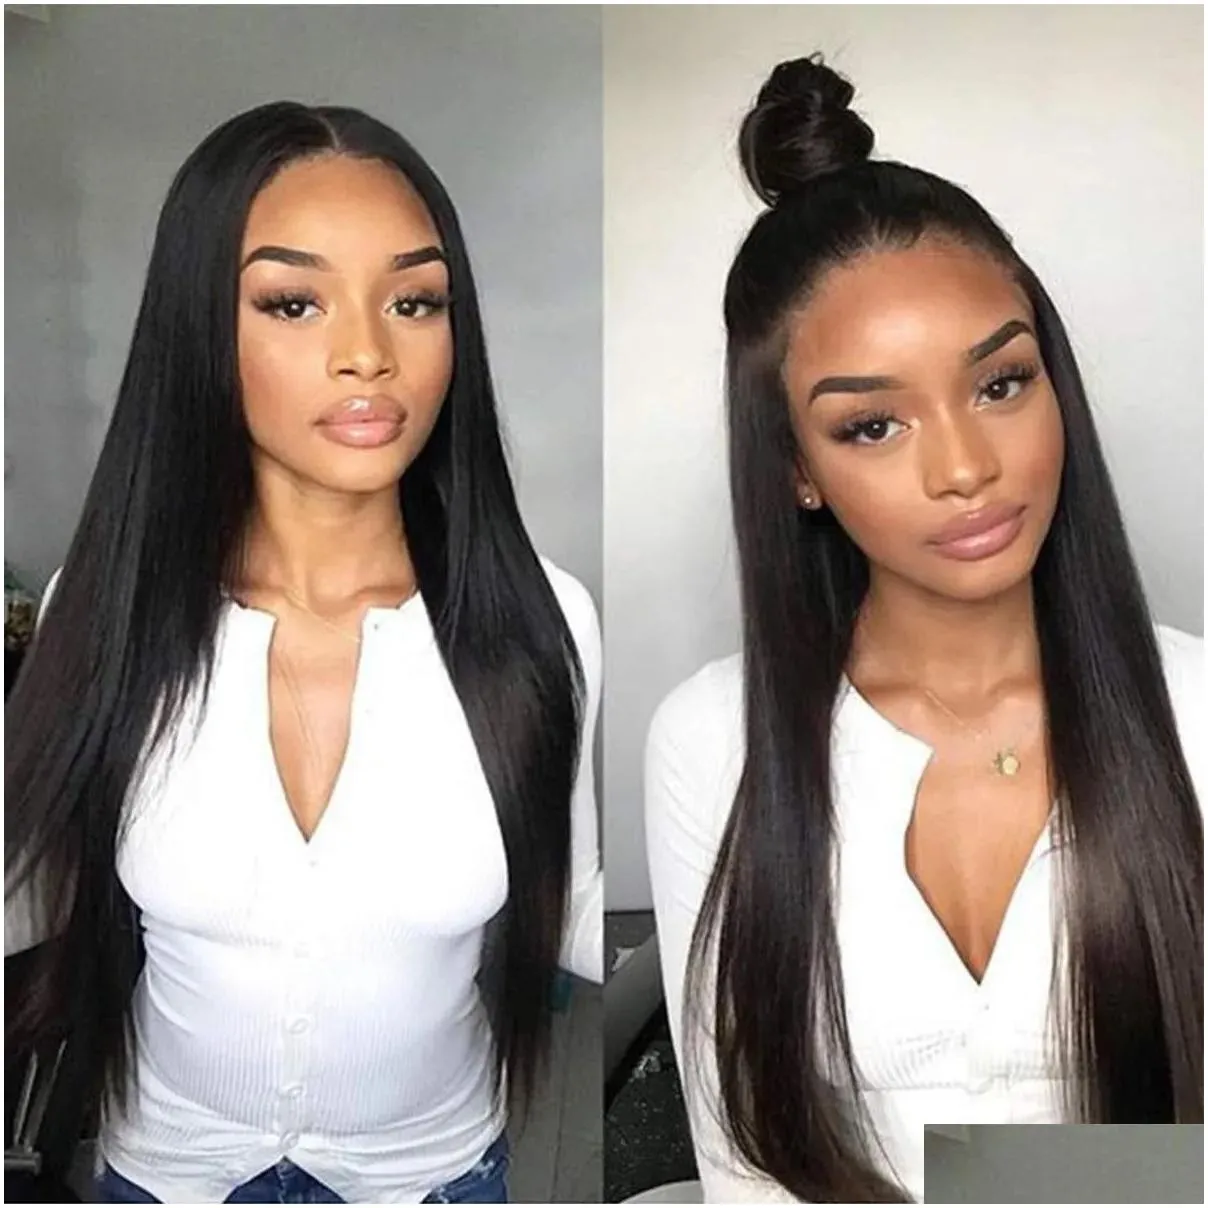 Hair Products Lace Wigs Silky Straight Lace Front Wig Brazilian Virgin Human Hair 4x4 5x5 6x6 7x7 13x4 13x6 360 Full Lace Wigs for Women Natural